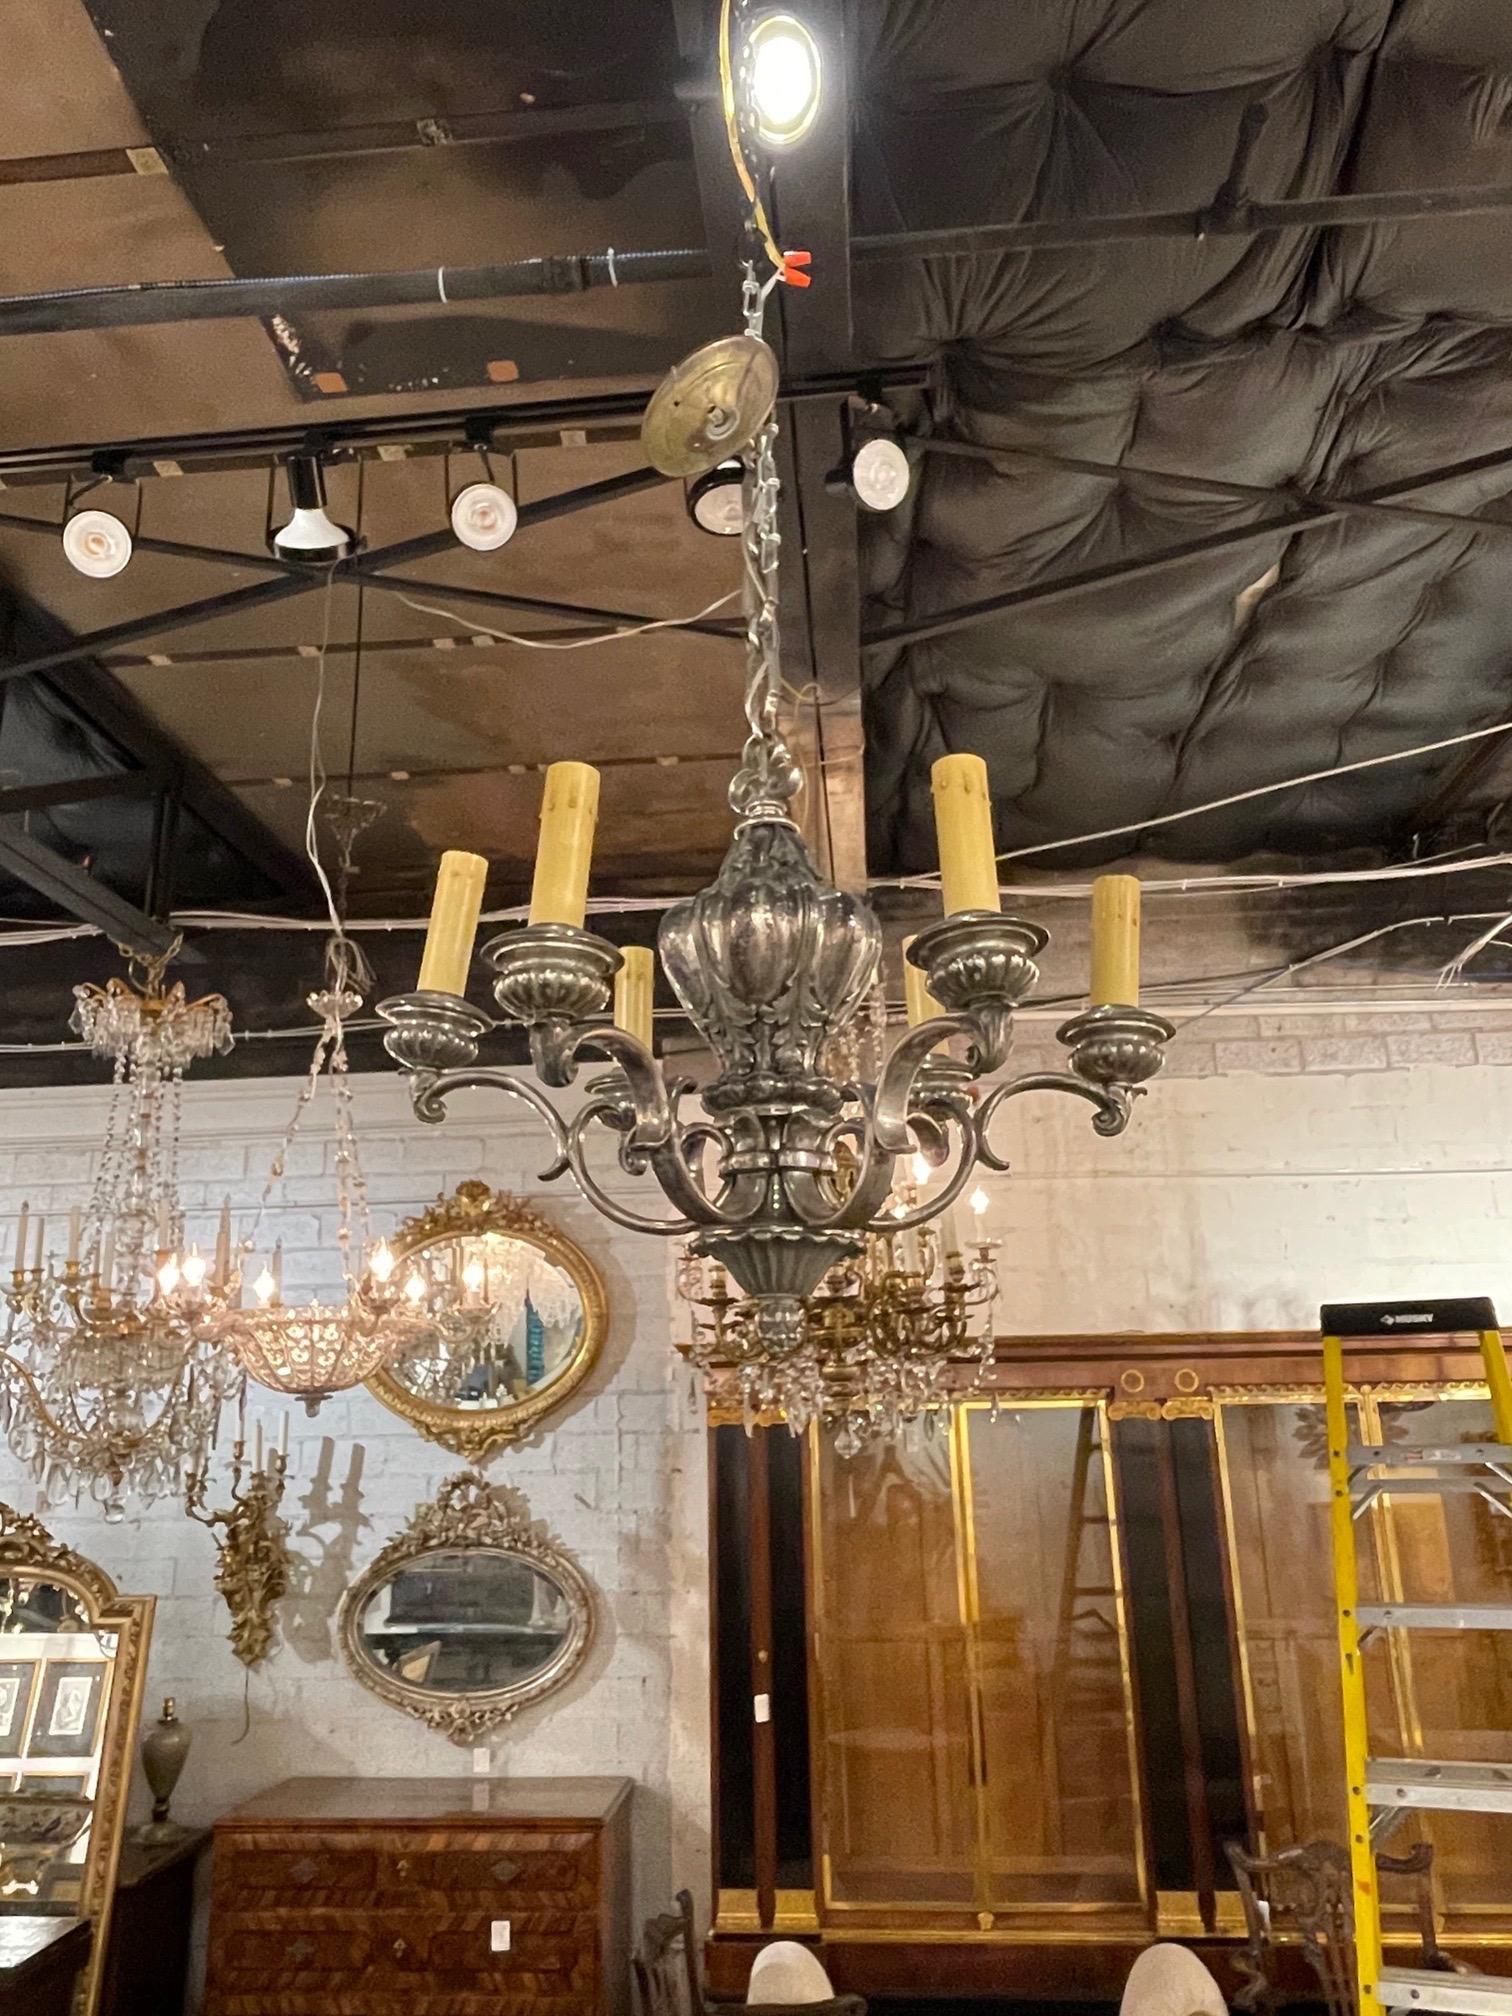 Lovely 19th century English silver plate 6-light chandelier. Beautiful decorative details on the base and arms. Makes an elegant statement!